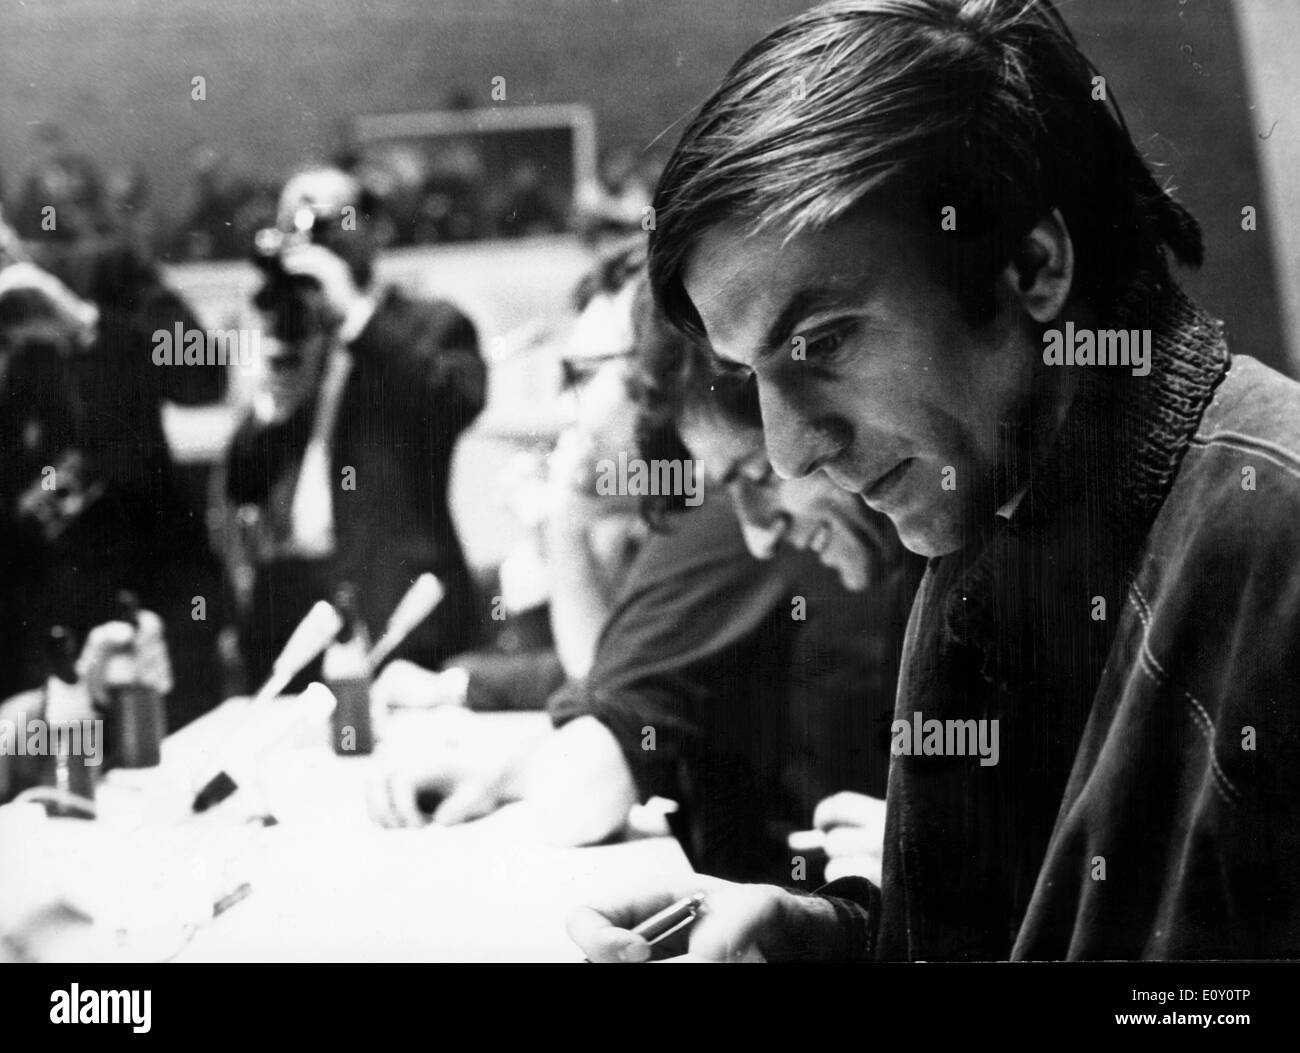 Feb 17, 1968; Berlin, Germany; RUDI DUTSCHKE the most prominent spokesperson of the German student movement of the 1960s. Stock Photo